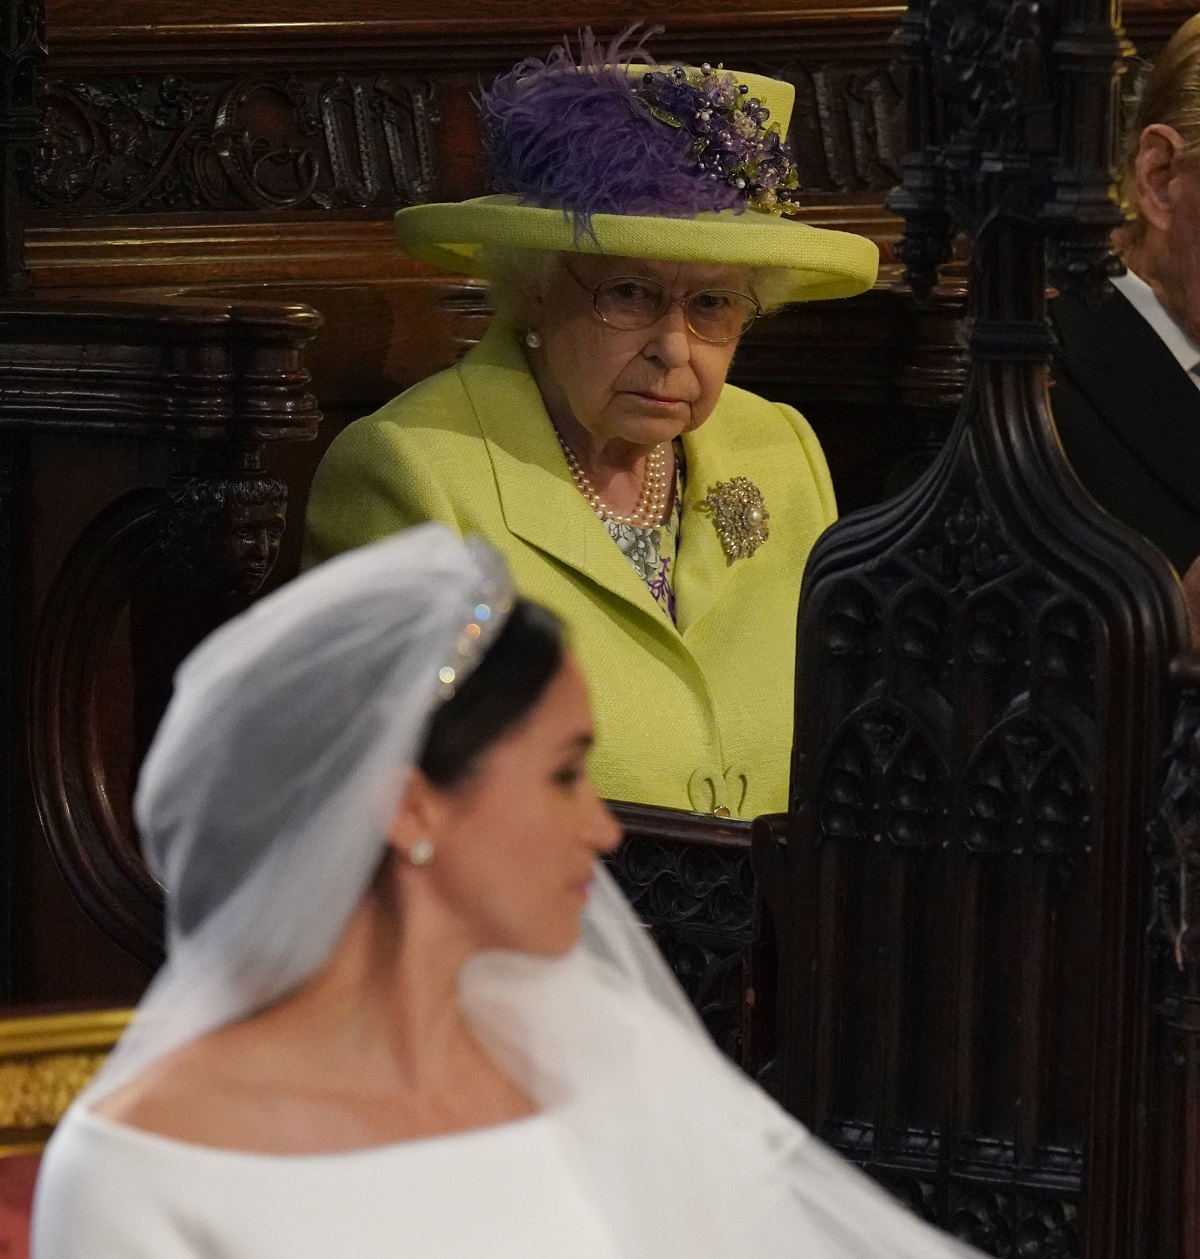 Queen Elizabeth II looks on during the wedding ceremony of Prince Harry and Meghan Markle